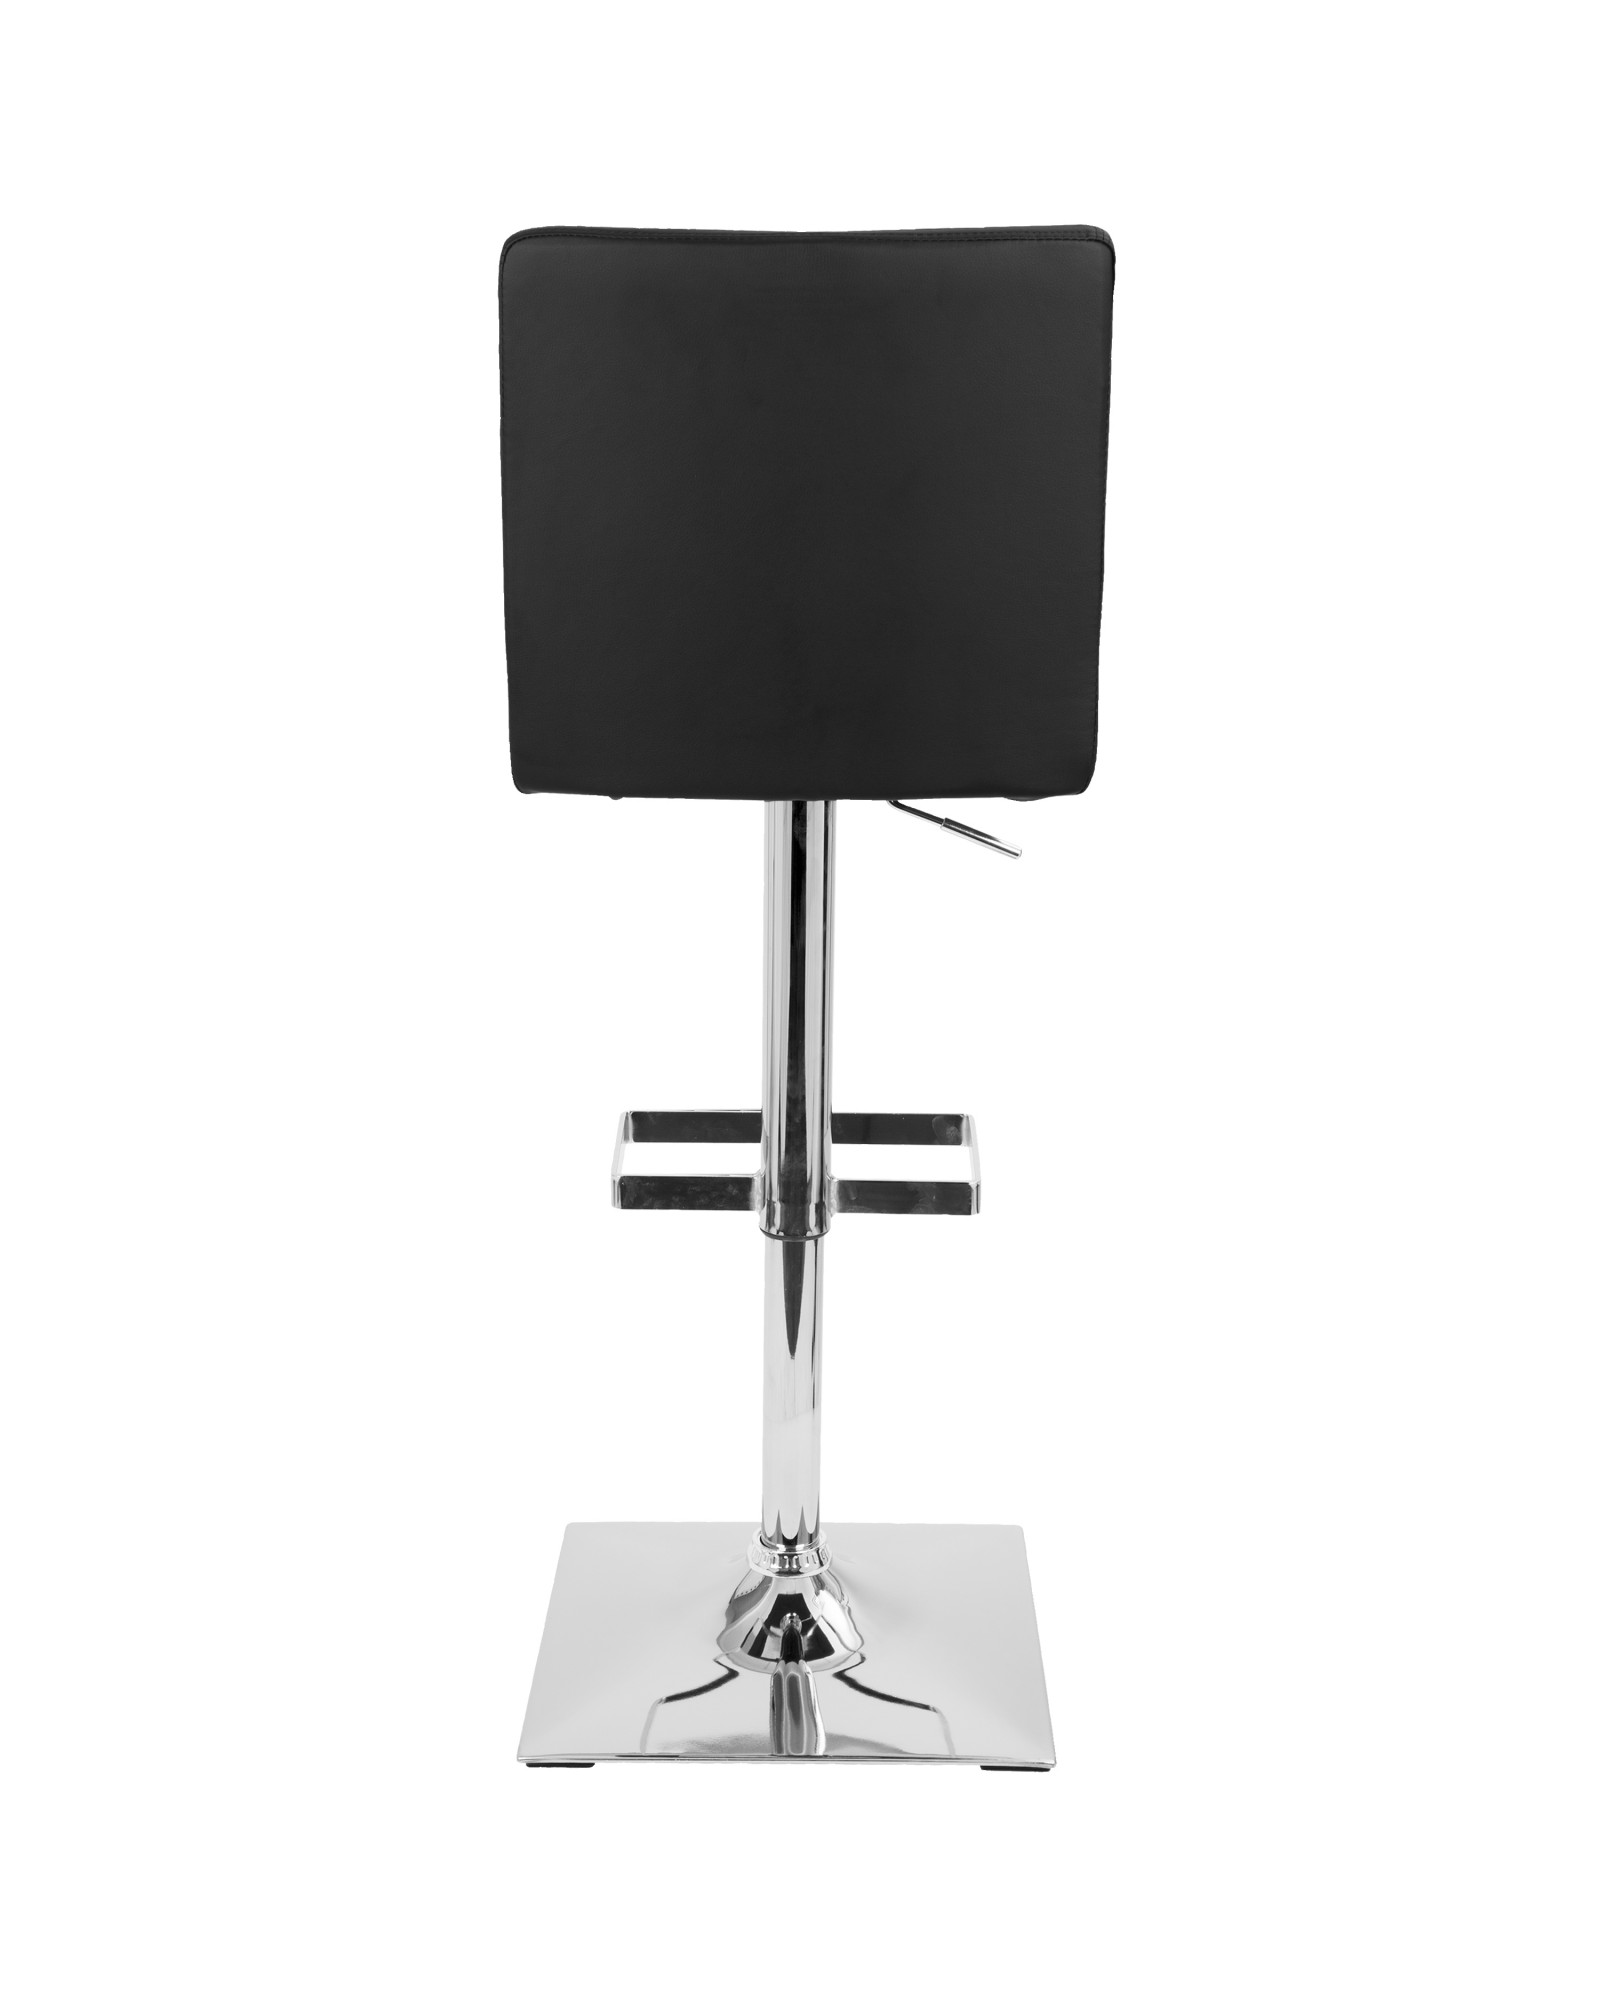 Captain Contemporary Adjustable Barstool with Swivel in Black Faux Leather